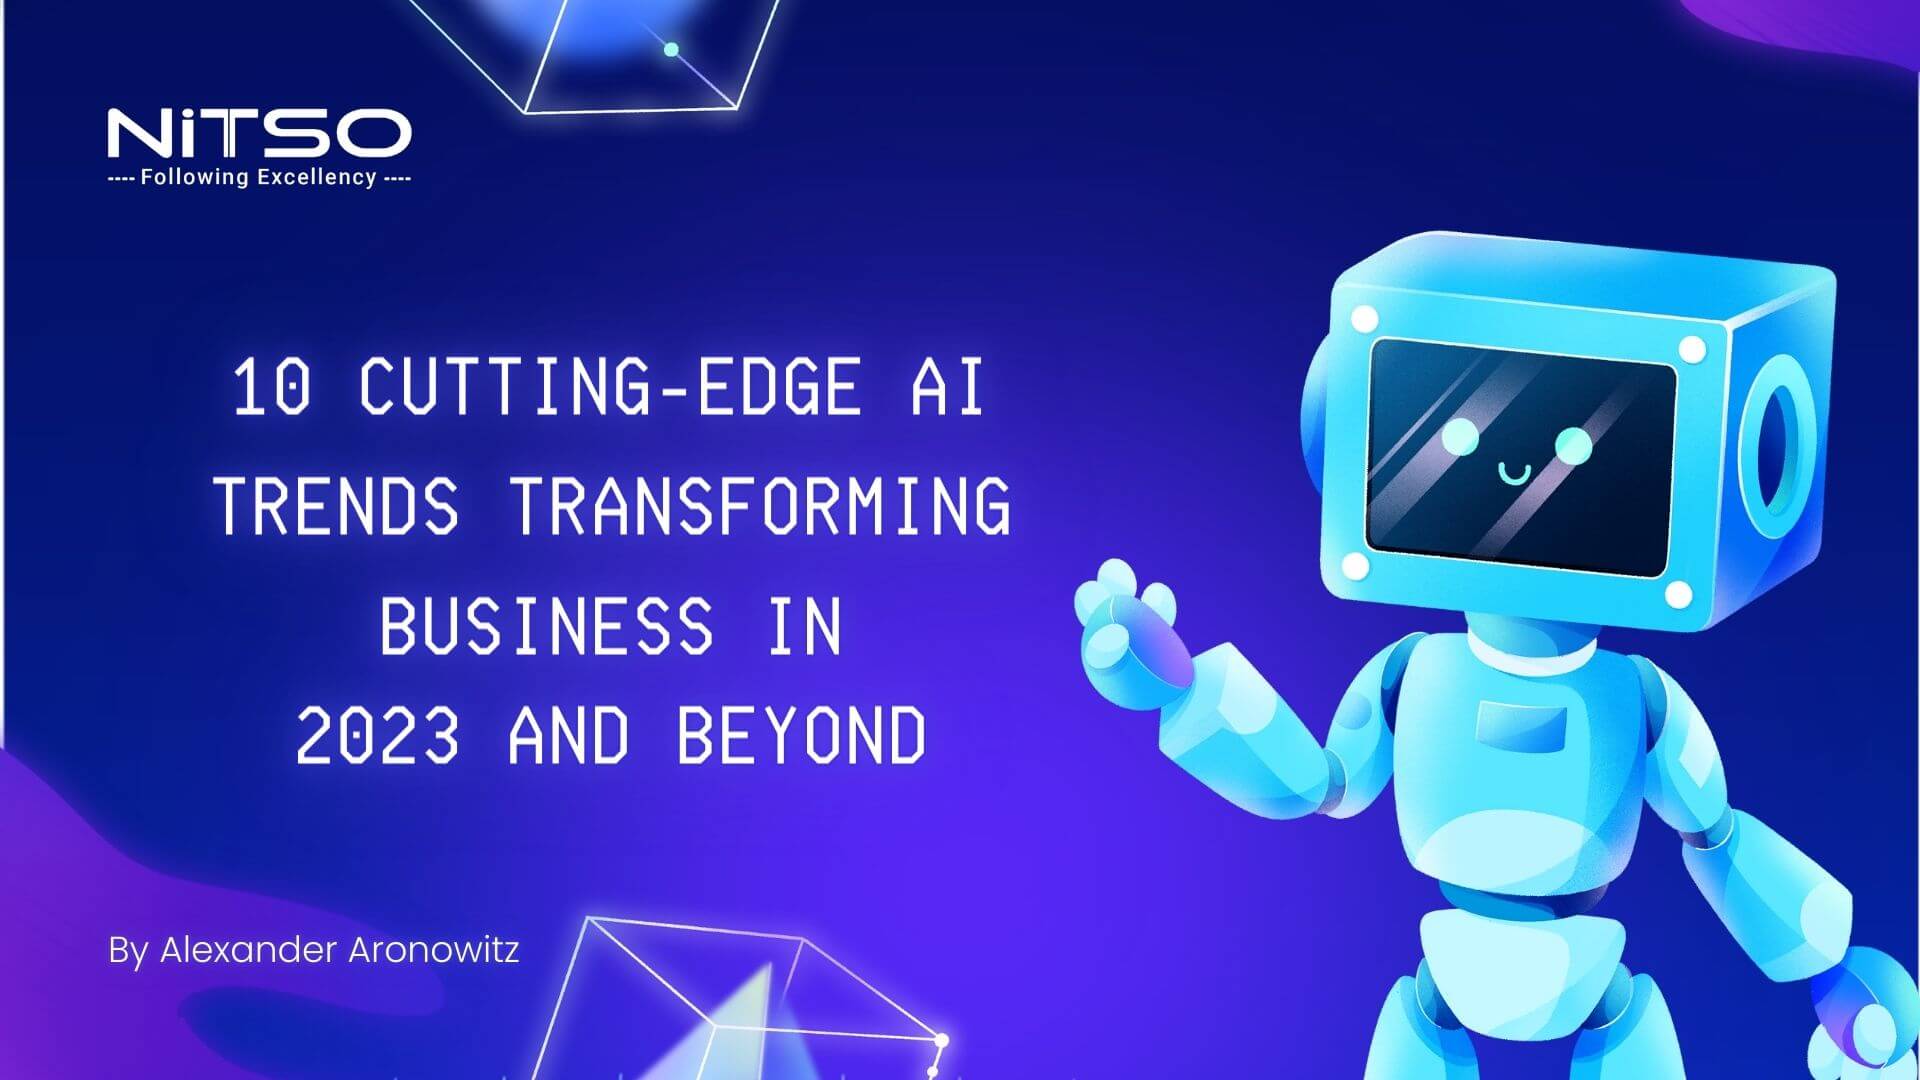 10 Cutting-Edge AI Trends For Business in 2023 and Beyond